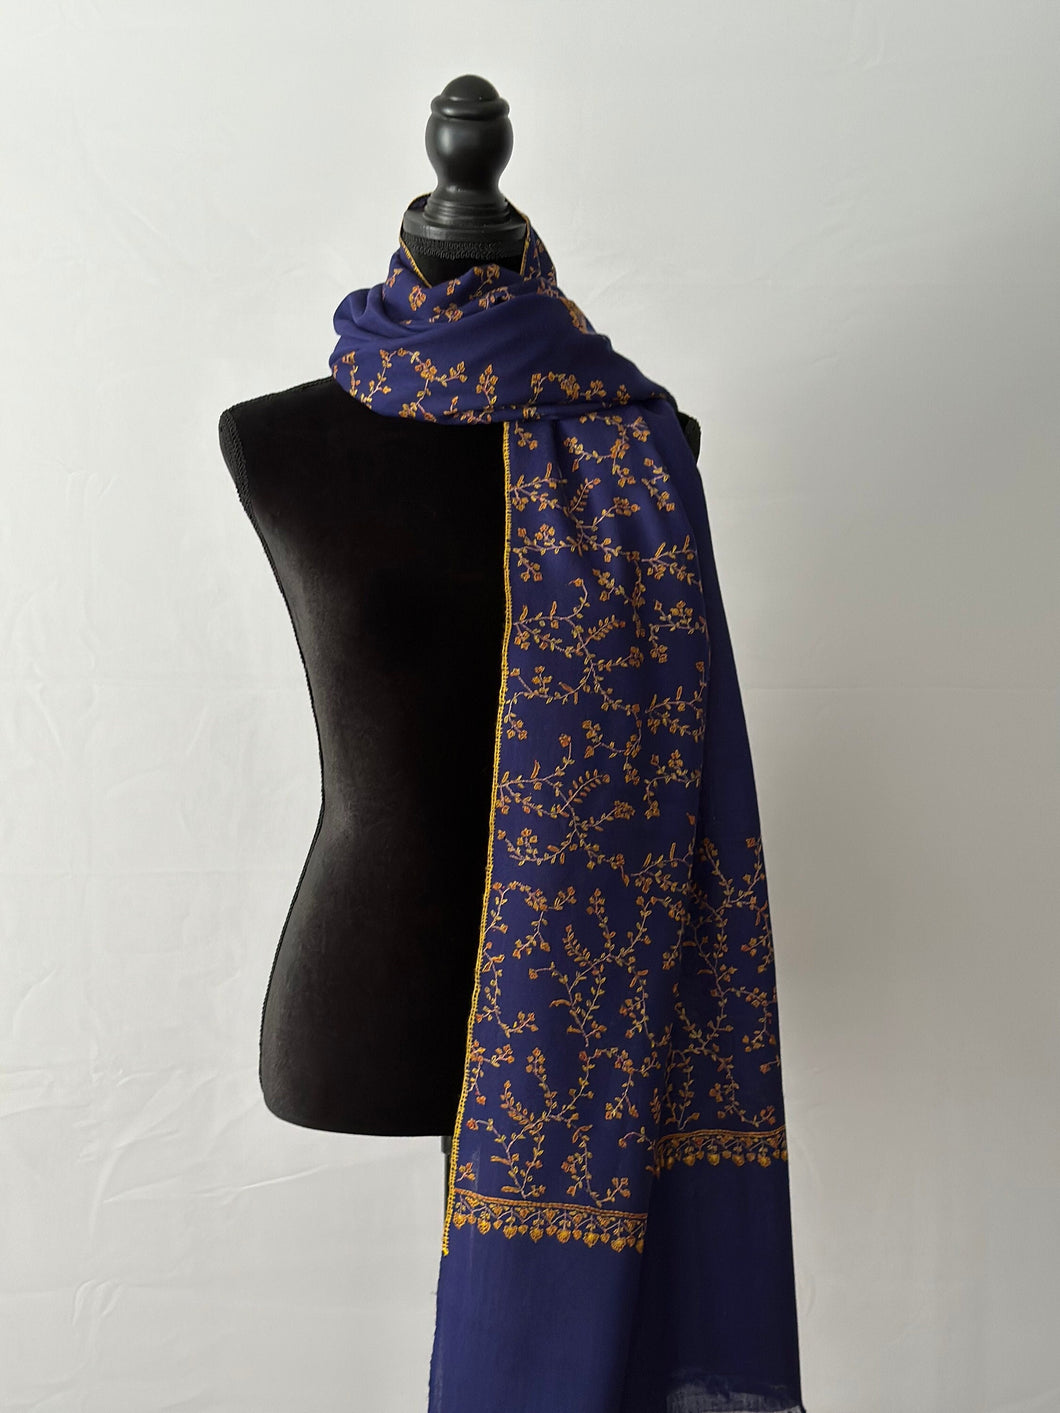 Jali Embroidered Pashmina (100% Fine Wool) - Sozni Extra Large and embroidered Kashmiri Shawl, all over embroidery, blue shawl